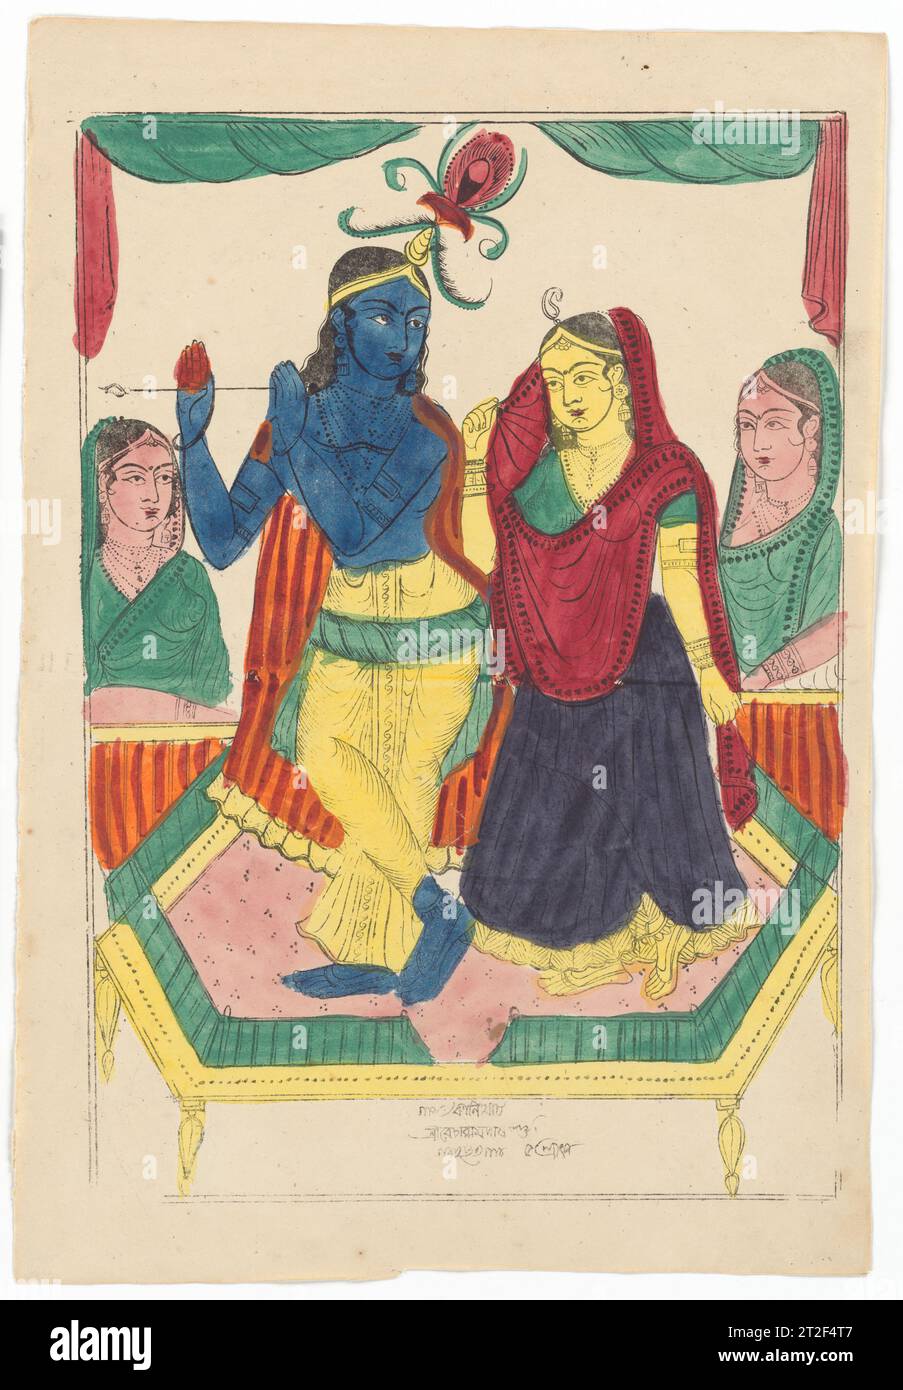 Krishna and Radha Becharam Das Dutta dated equivalent to July 20, 1856 Krishna is represented here as the flute playing Lord, Venugopal, charming his lover the gopi (cow-maid) Radha with sweet music. The lovers are seen standing together on a golden dais in an interior framed by drawn curtains, a setting somewhat suggestive of stage and photographic studio settings. A pair of gopis attend them. This much favored subject is more typically situated in a forest glade, the setting for Krishna and Radha’s tryst. The romantic encounter of the divine Krishna and the mortal cow-maid fueled Vaishnava d Stock Photo